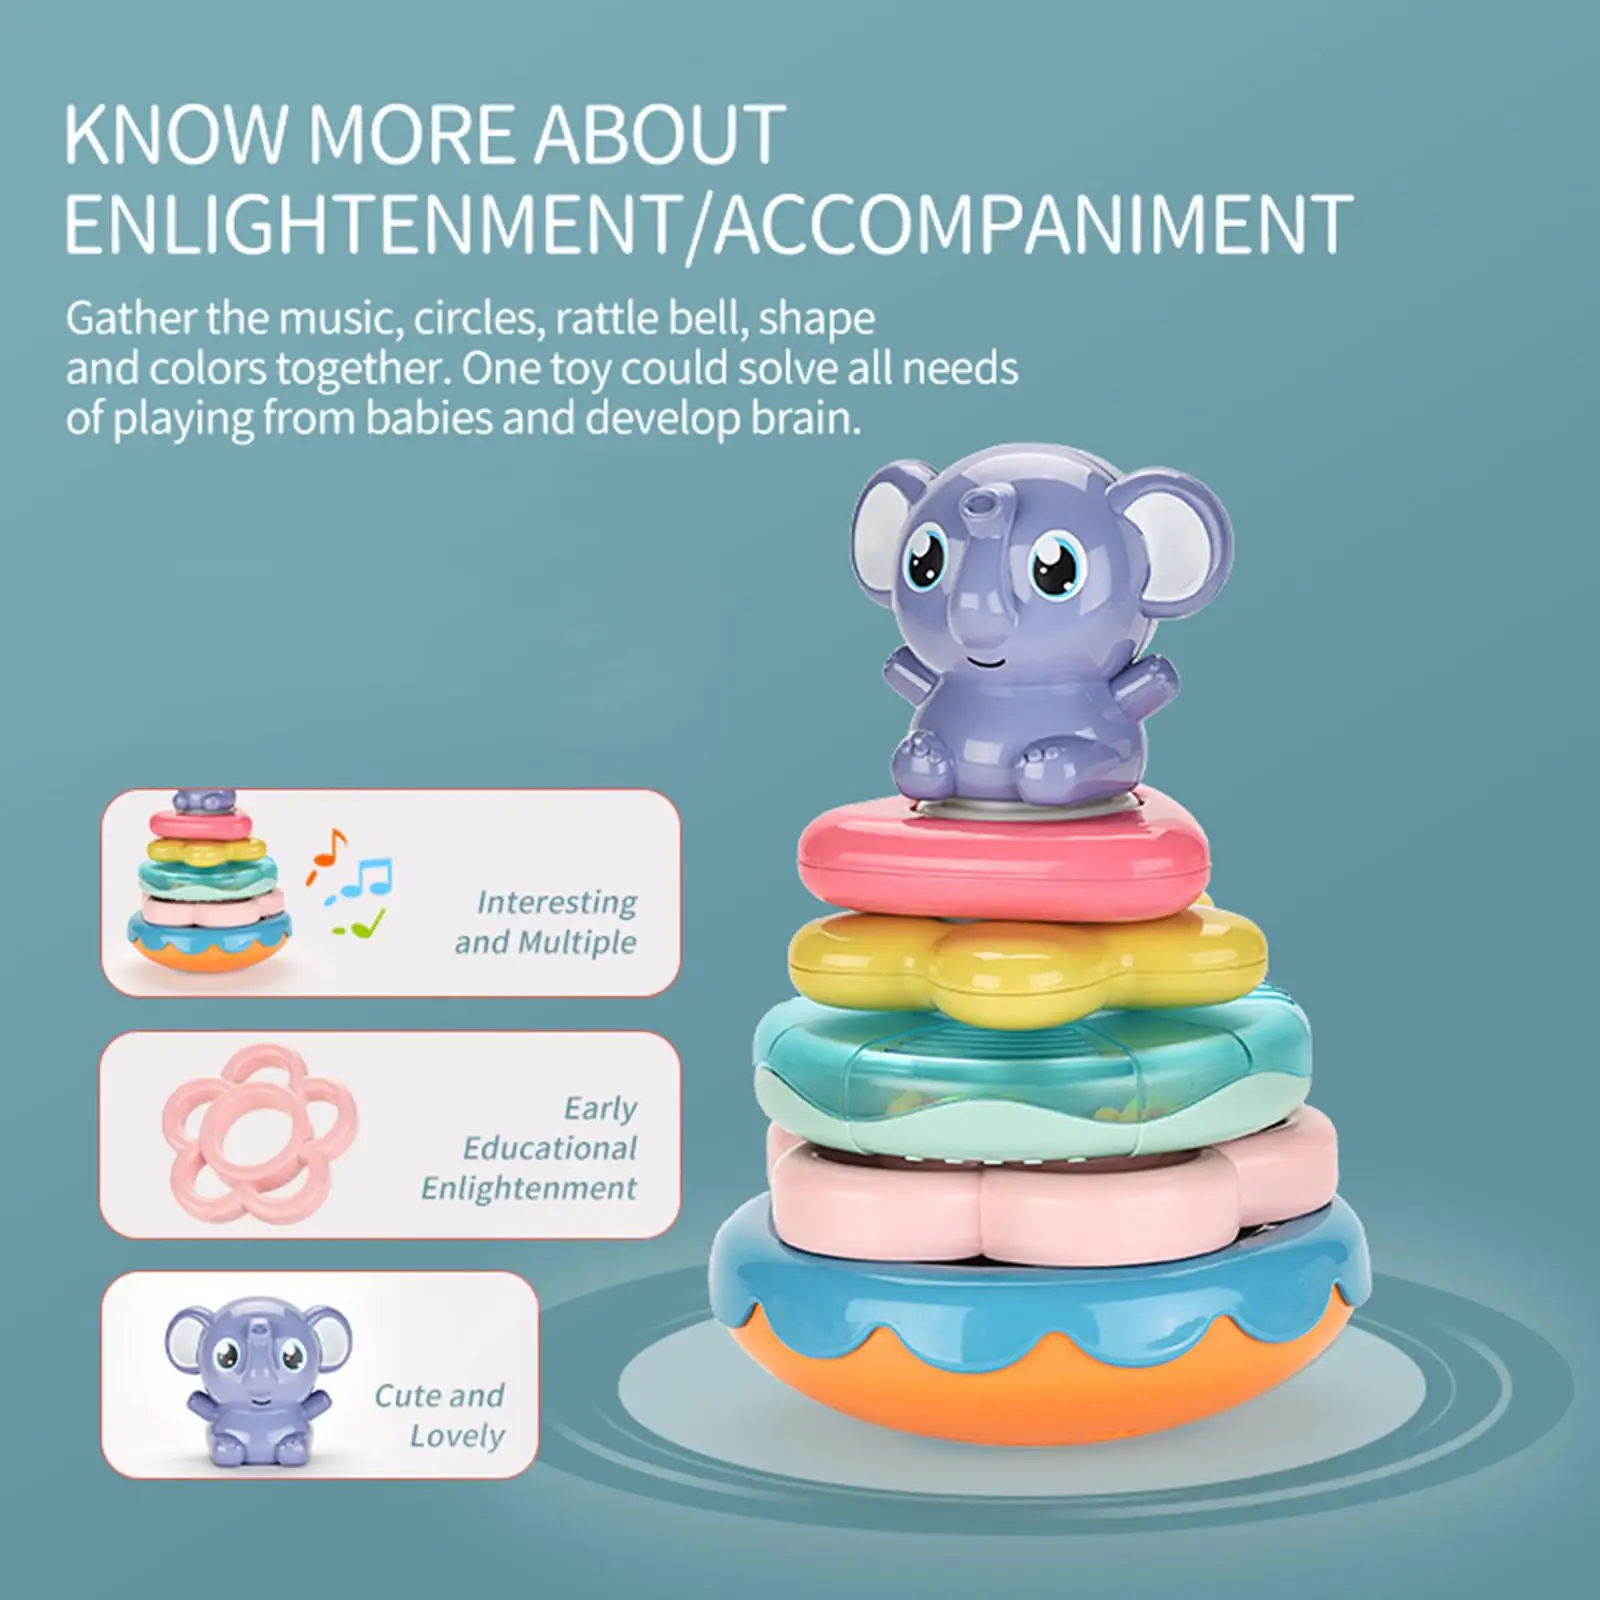 Building Rings Elephant Stacker Early Educational Learning Interactive Toy Rings Baby Musical for Baby Toddlers